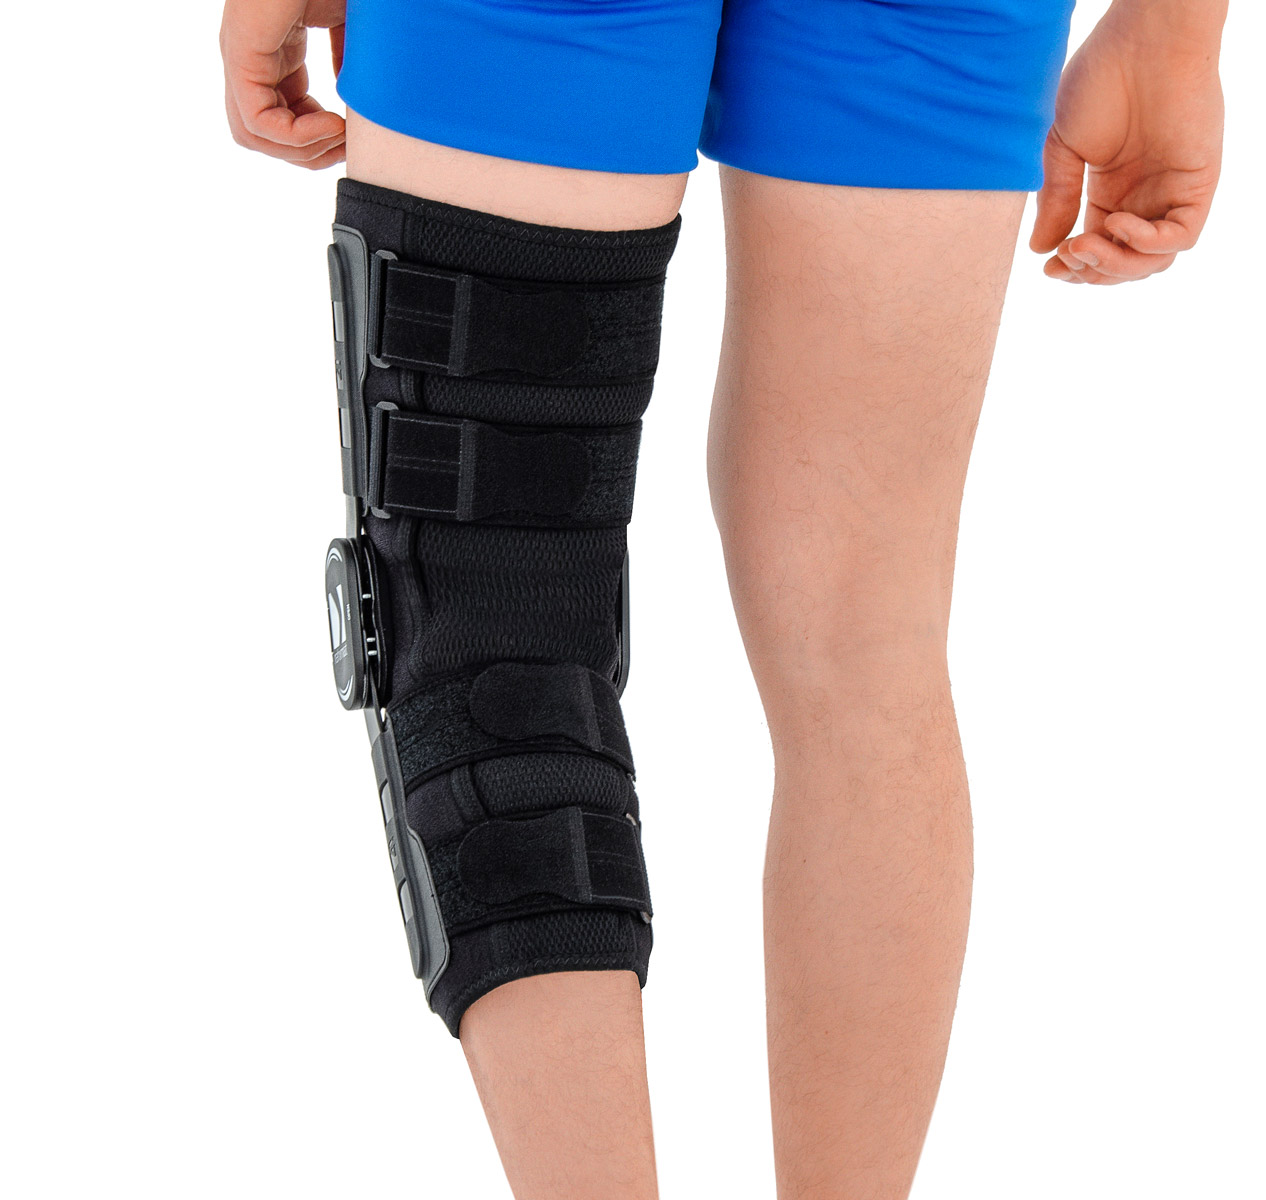 Lower limb support OKD-02  Reh4Mat – lower limb orthosis and braces -  Manufacturer of modern orthopaedic devices